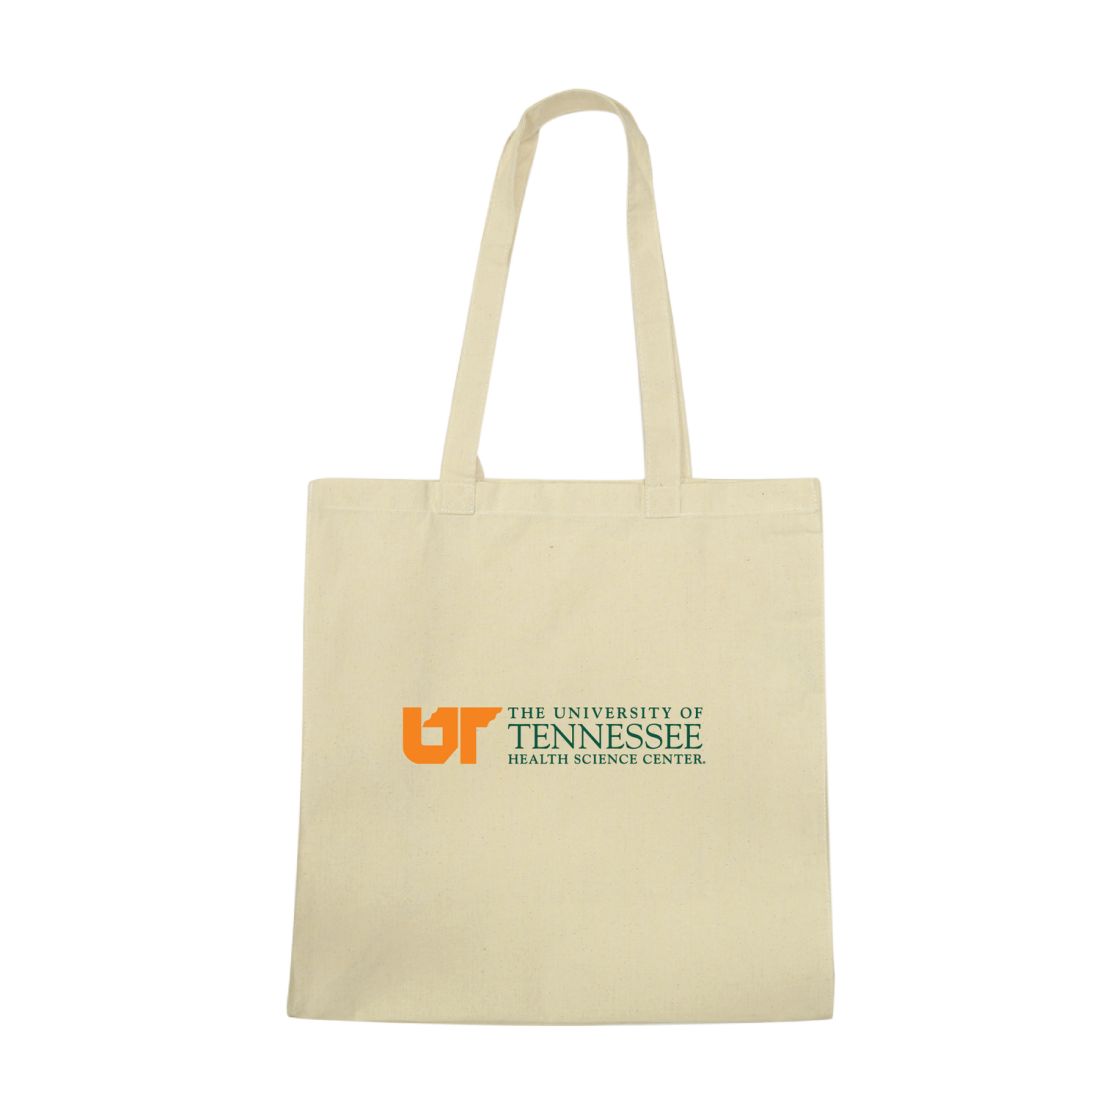 UTHSC University of Tennessee Health Science Center 0 Institutional Tote Bag